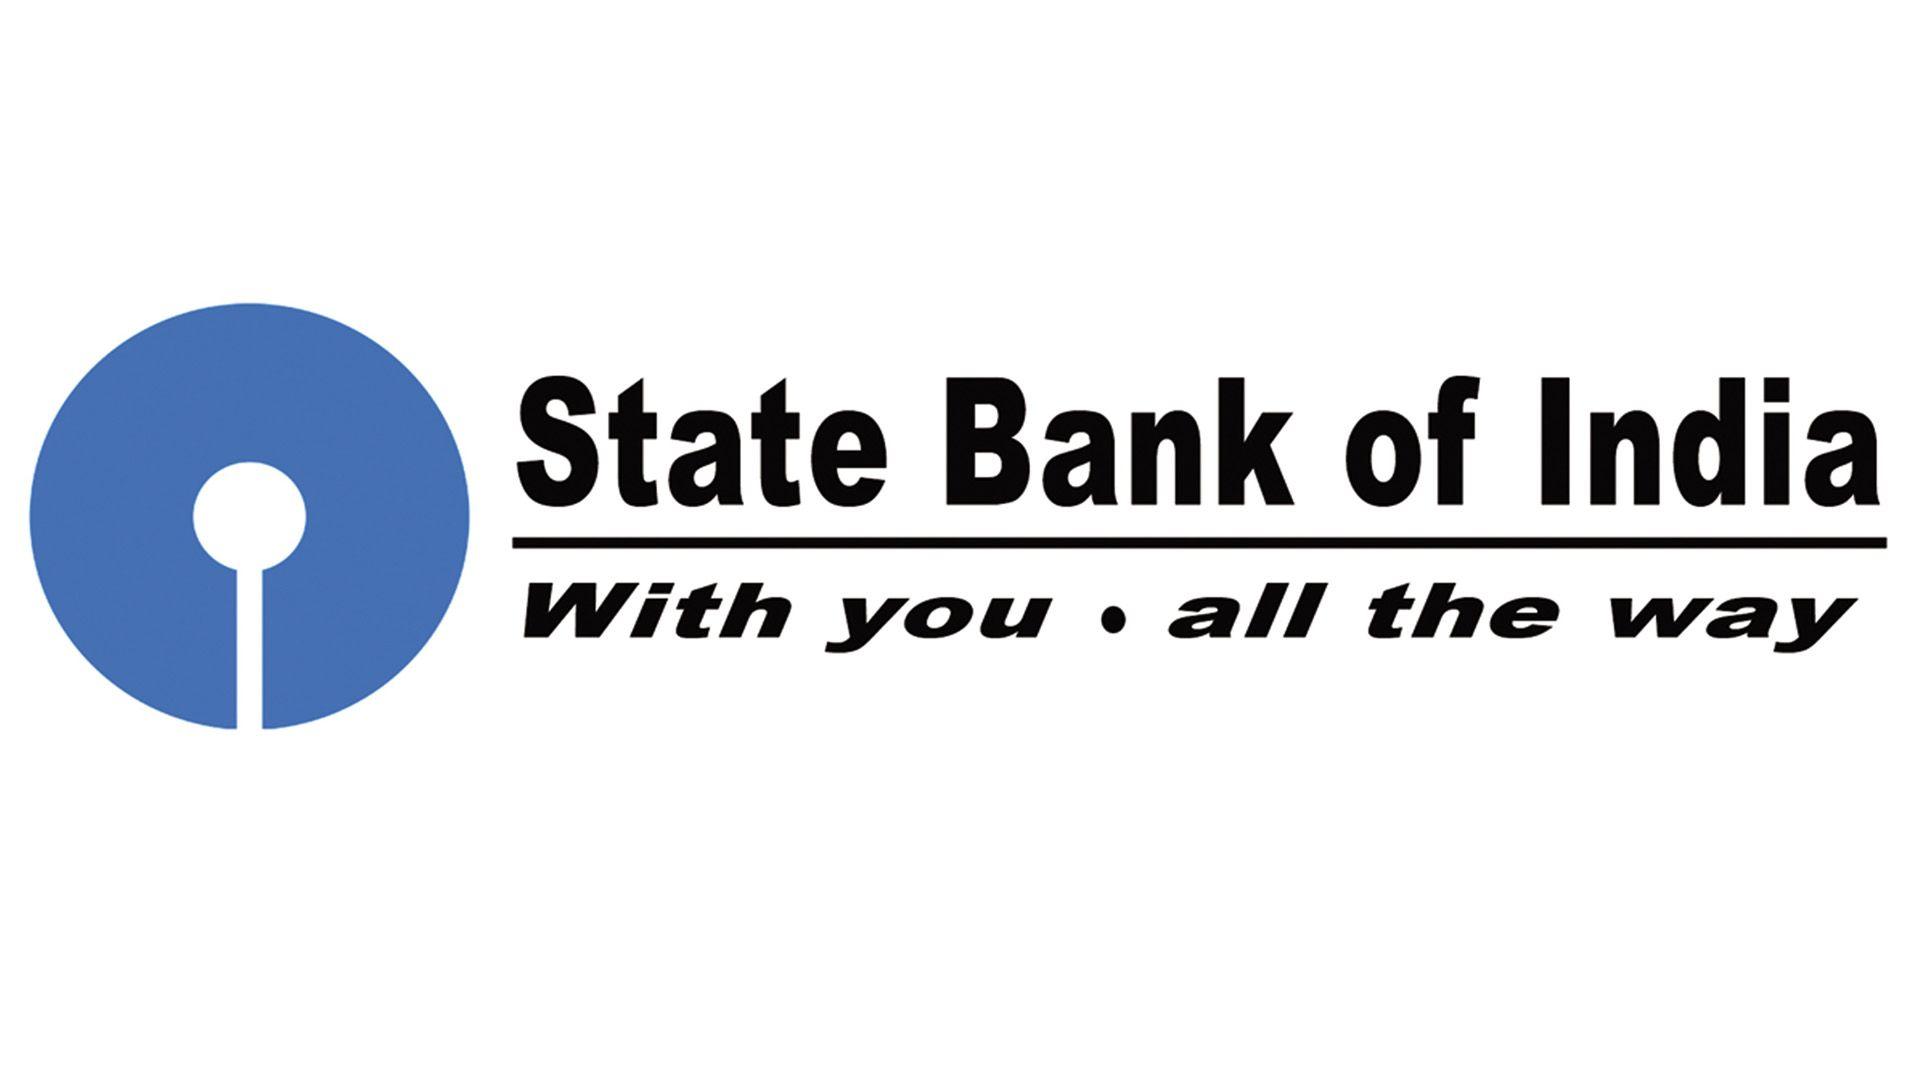 State Bank of India Logo - SBI Logo, SBI Symbol, Meaning, History and Evolution